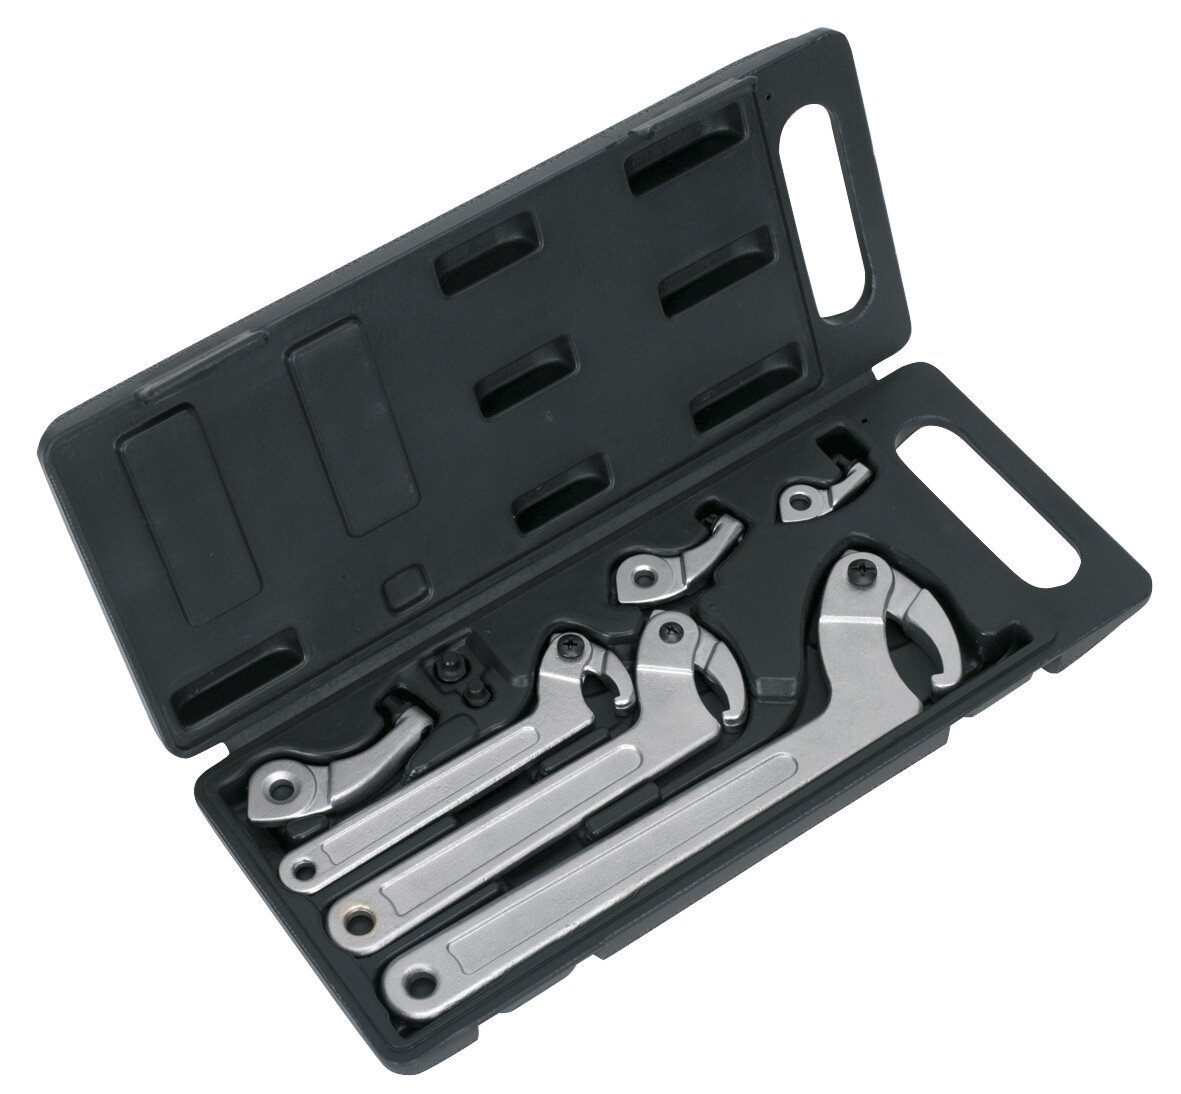 Sealey Adjustable C Spanner - Hook & Pin Wrench Set 4pc 51-121mm